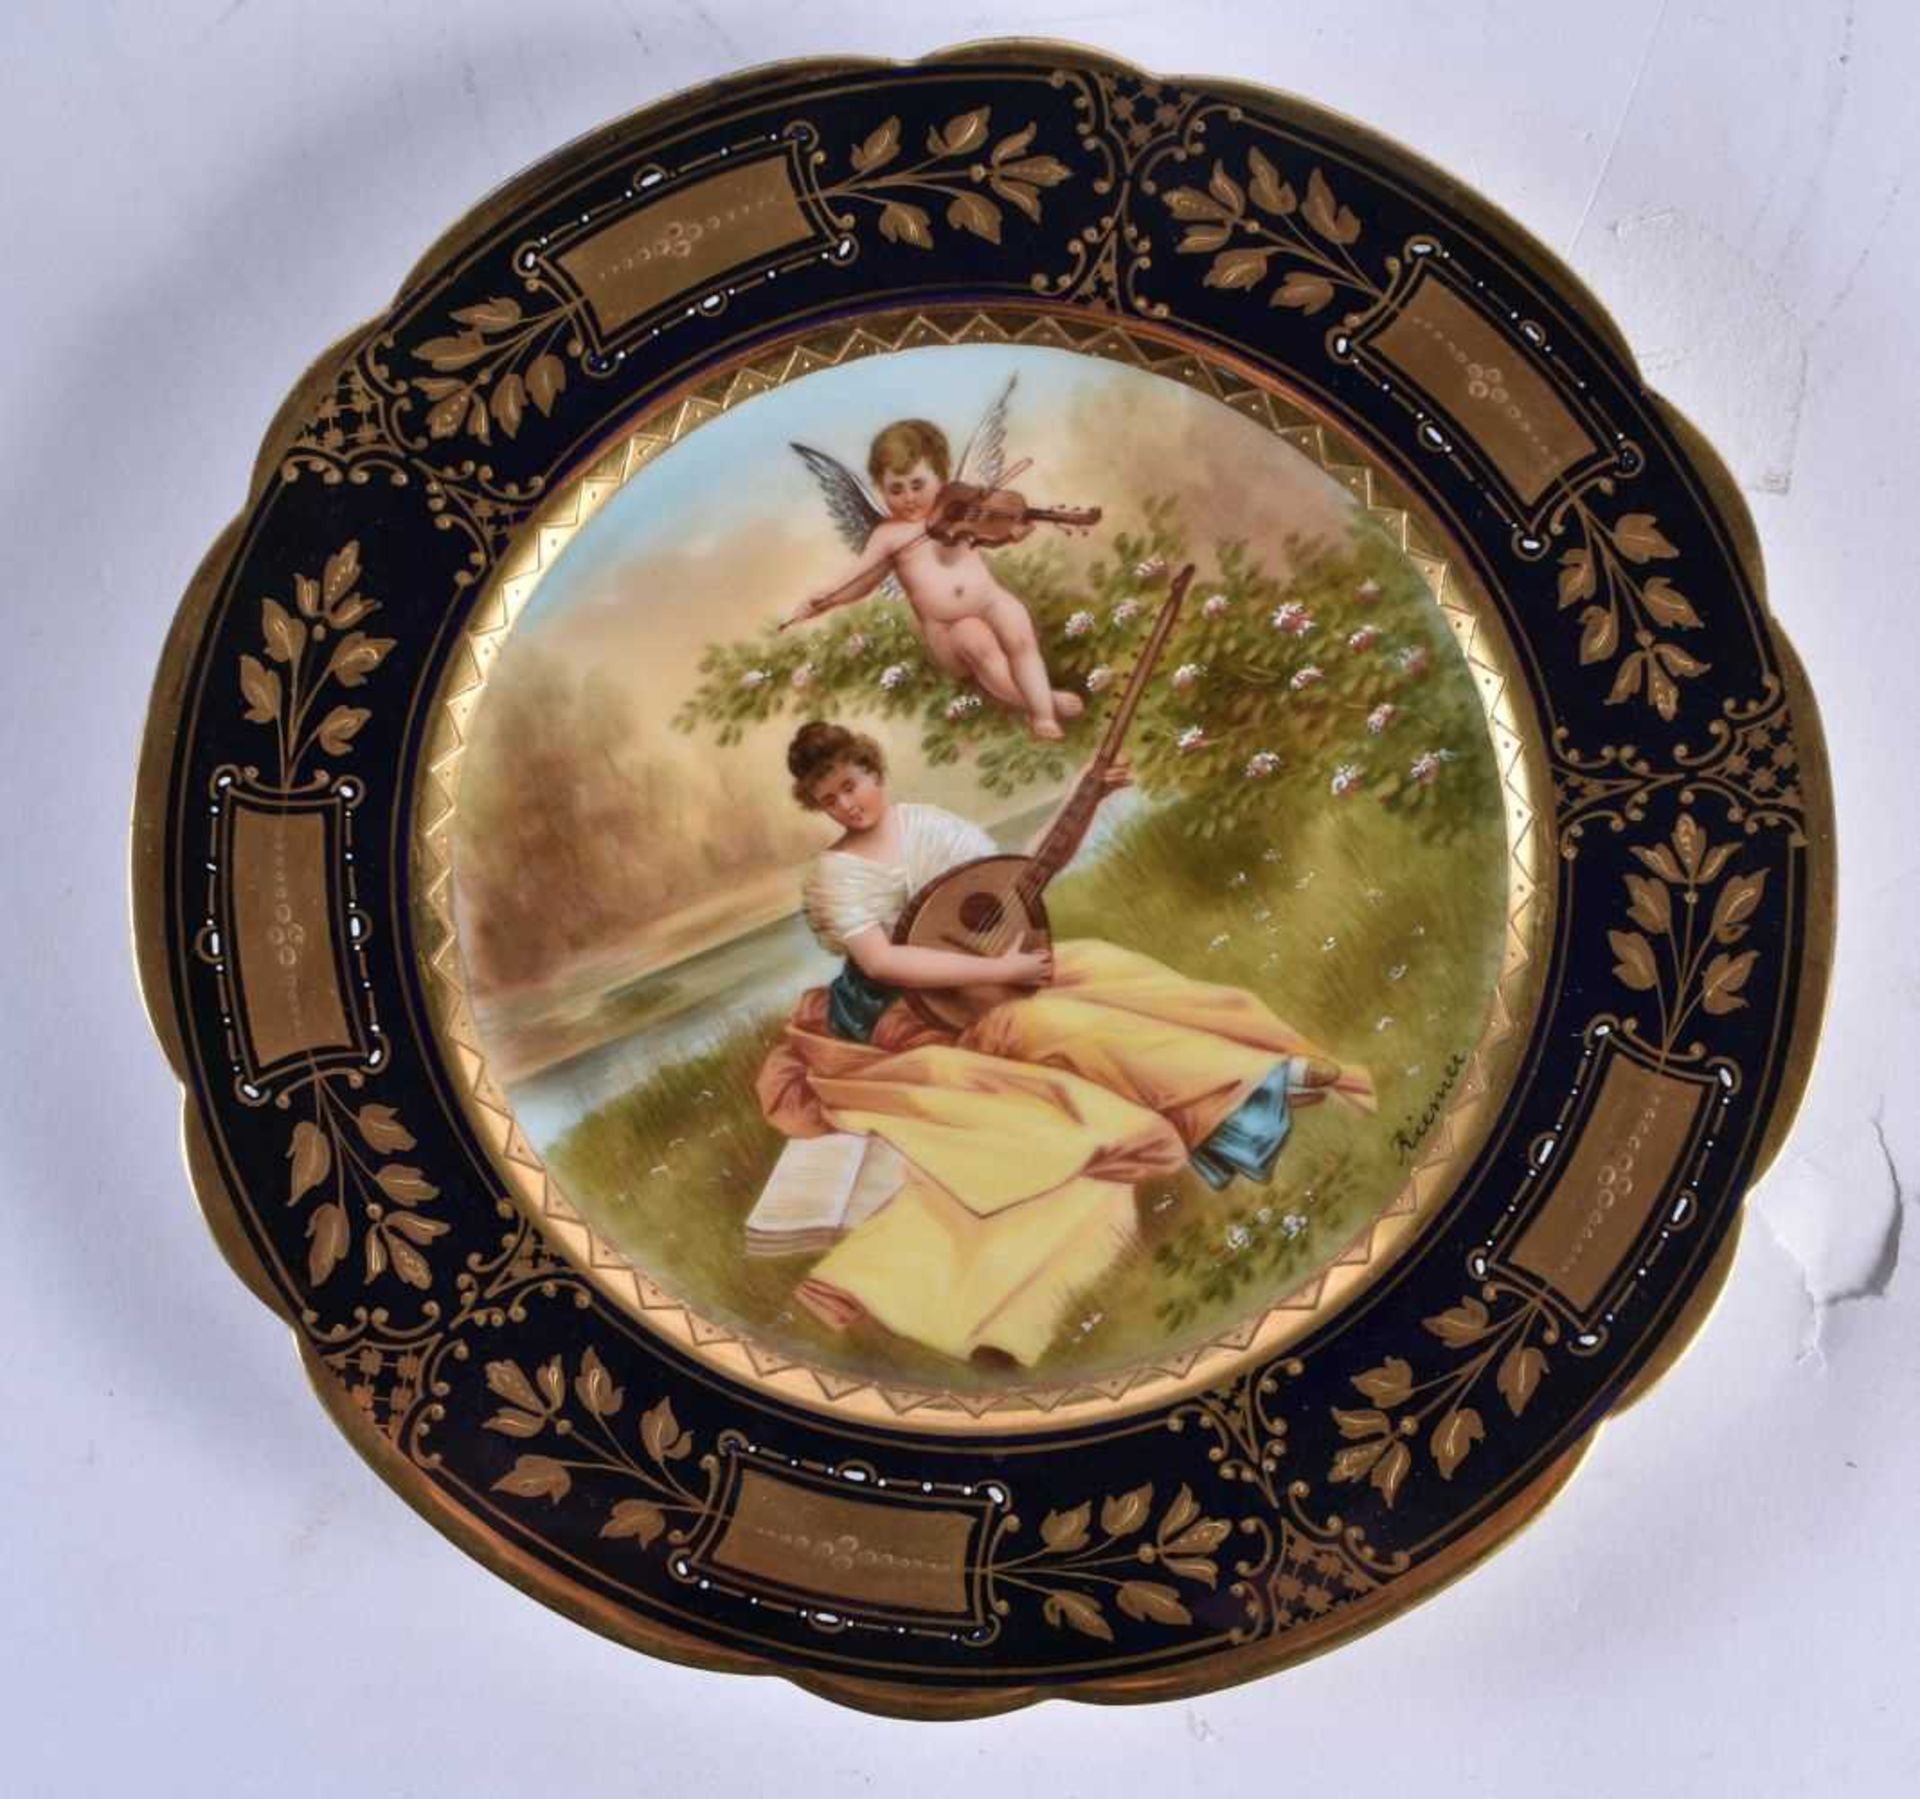 A GOOD EARLY 20TH CENTURY VIENNA PORCELAIN DESSERT SERVICE C1900 painted with figures and landscapes - Image 7 of 9